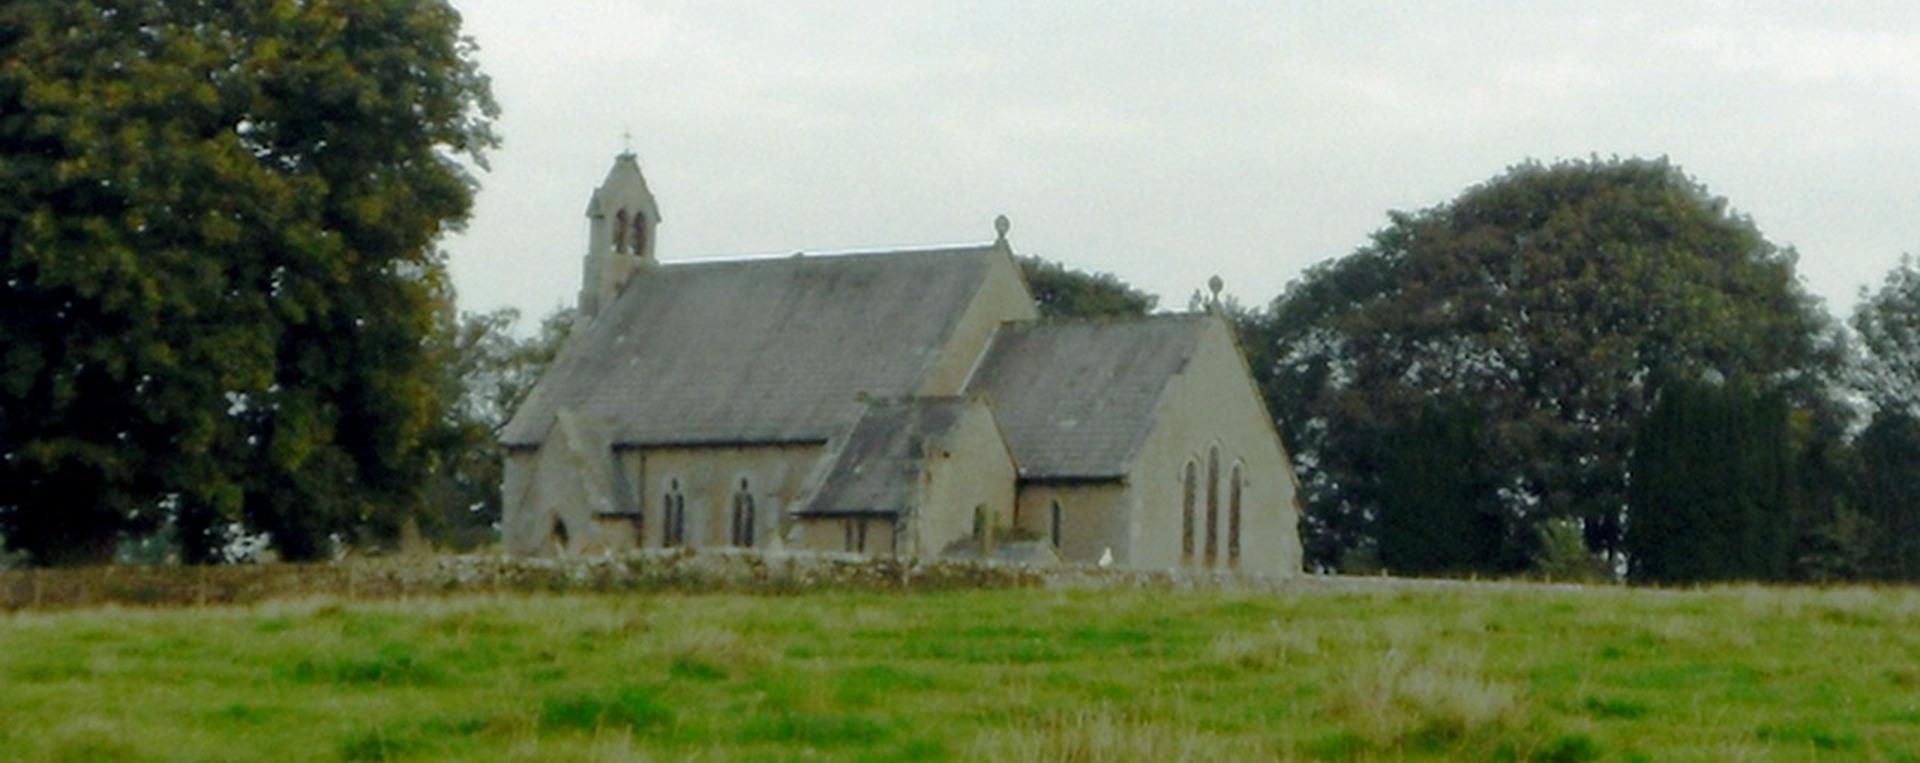 Church of St. Thomas a Becket in Kirkhouse